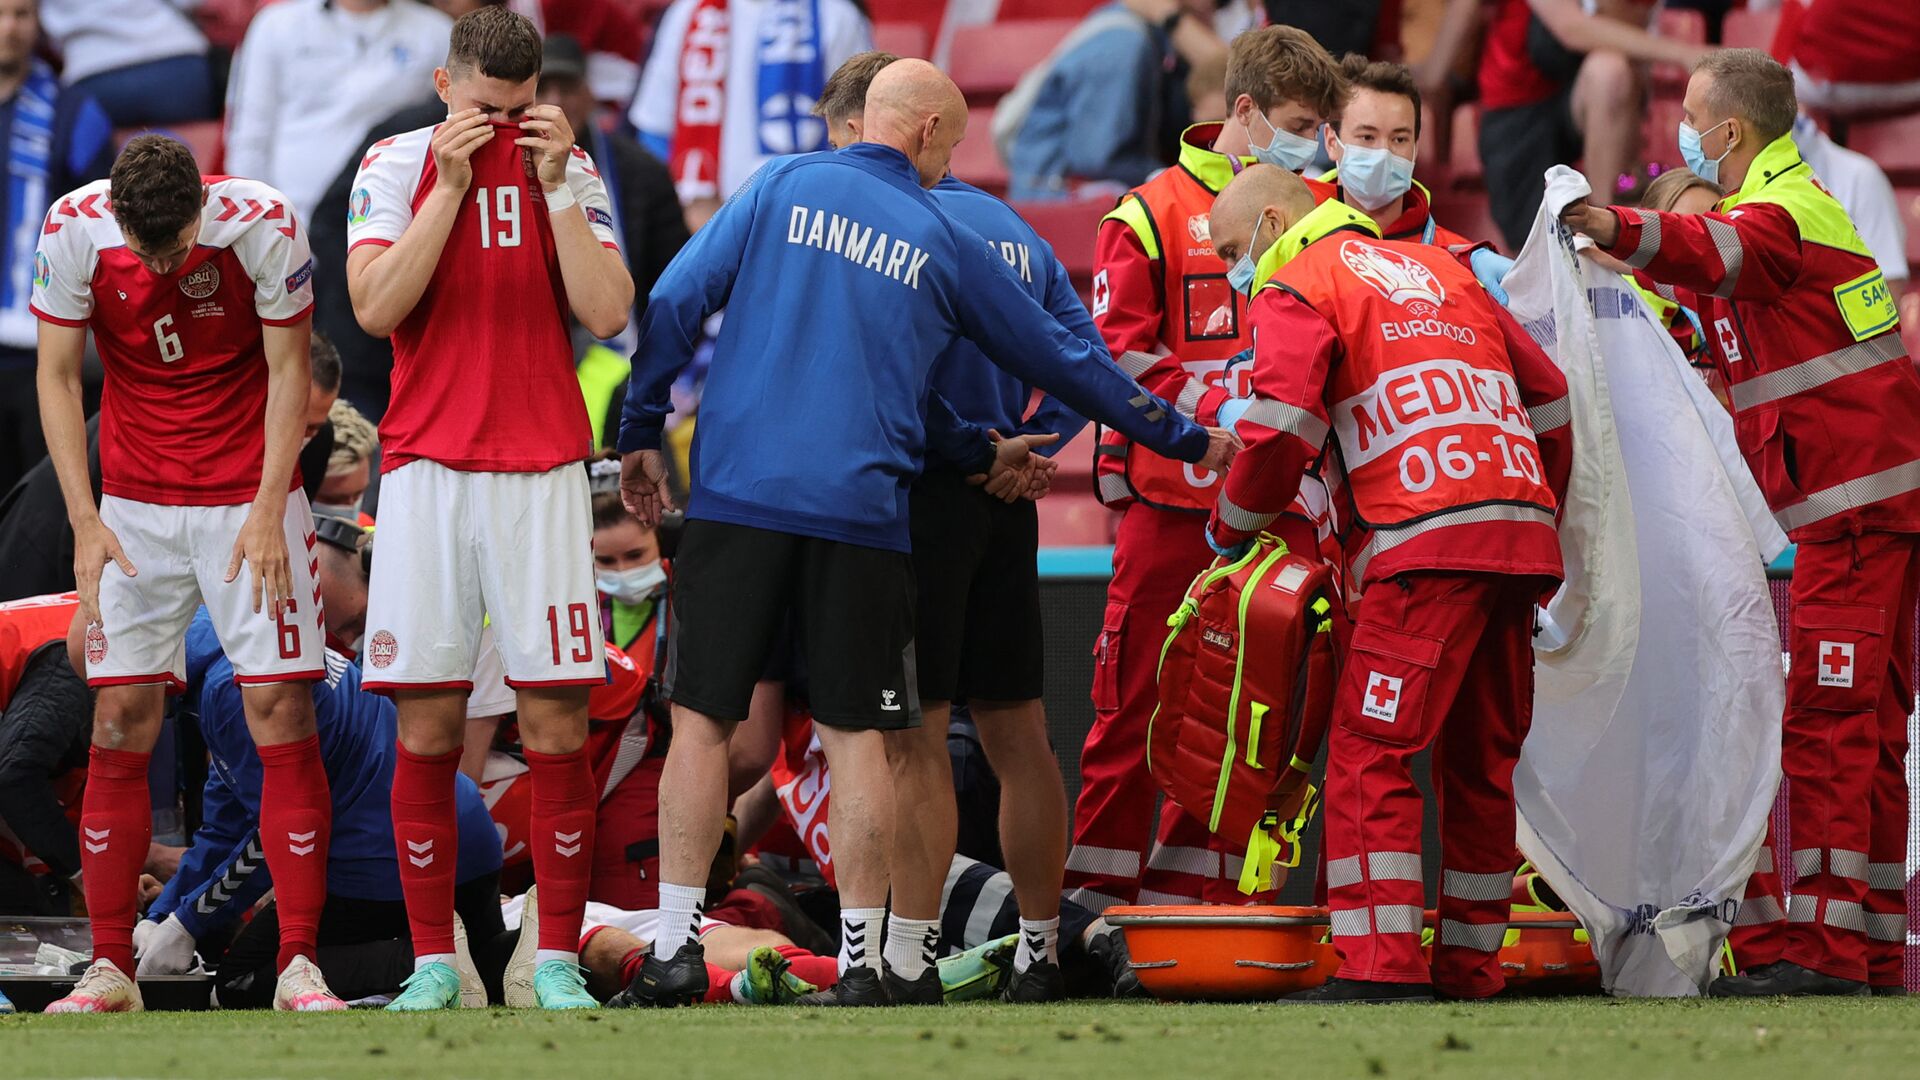 Denmark's players react as paramedics attend to Denmark's midfielder Christian Eriksen after he collapsed on the pitch during the UEFA EURO 2020 Group B football match between Denmark and Finland at the Parken Stadium in Copenhagen on June 12, 2021. - اسپوتنیک افغانستان  , 1920, 01.08.2021